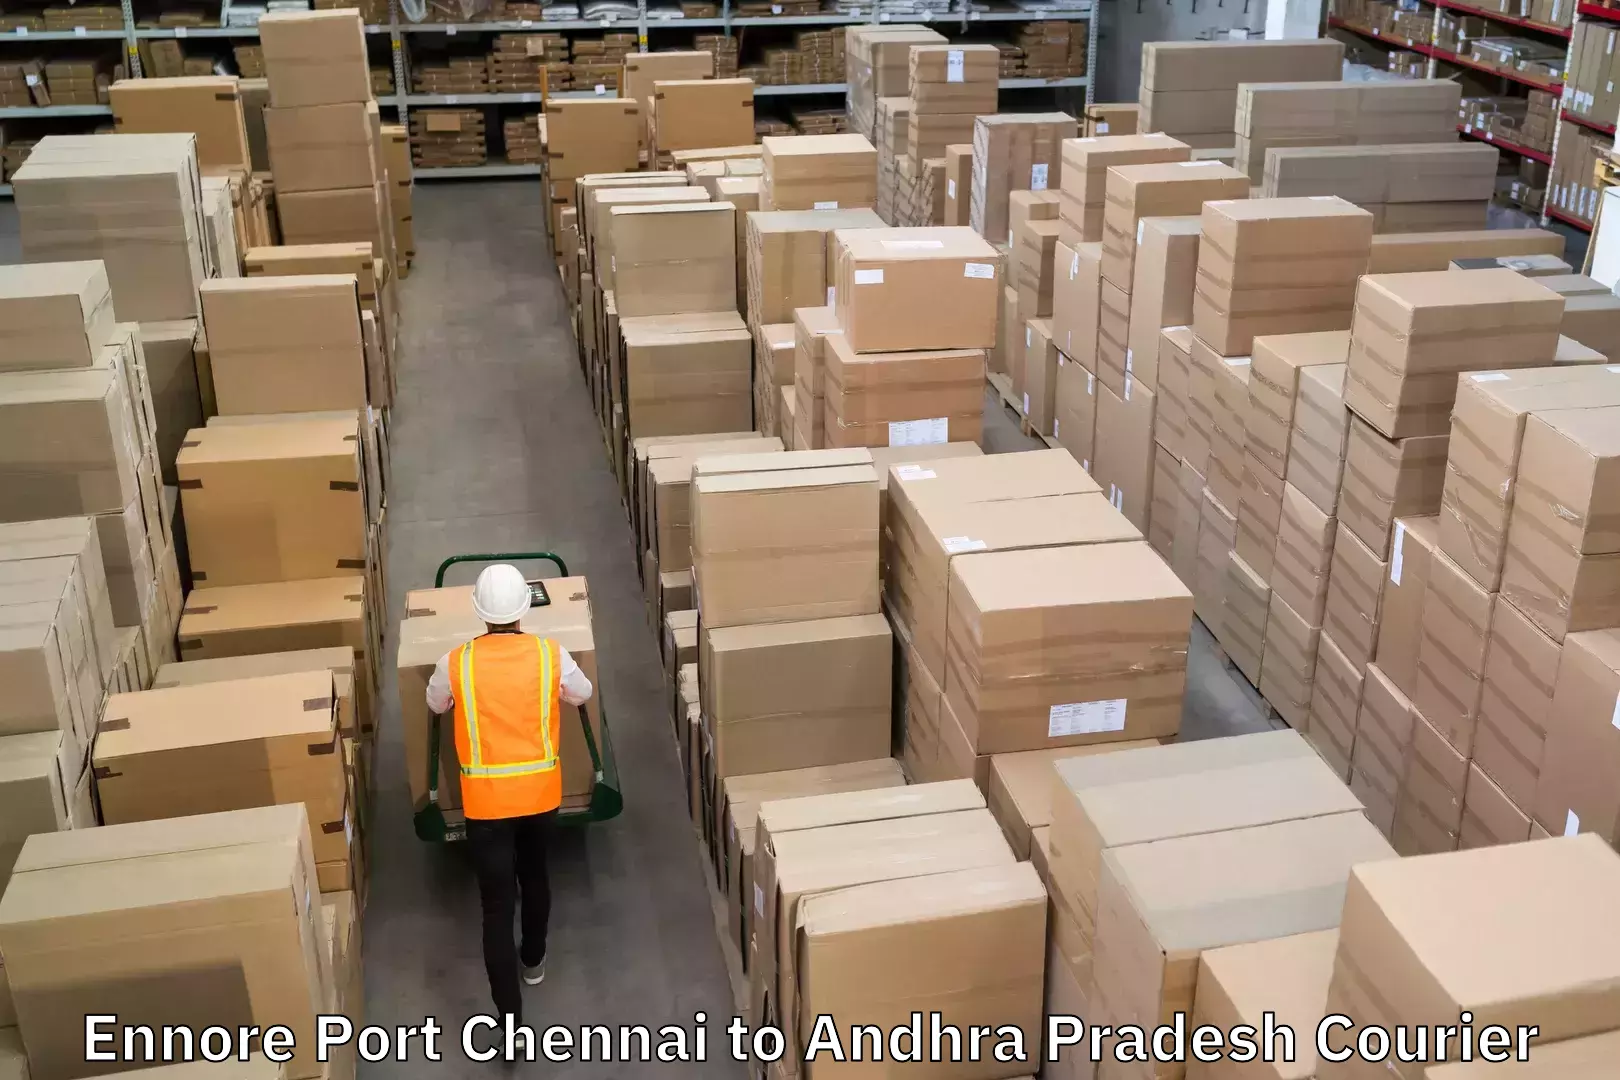 Parcel service for businesses Ennore Port Chennai to Andhra Pradesh